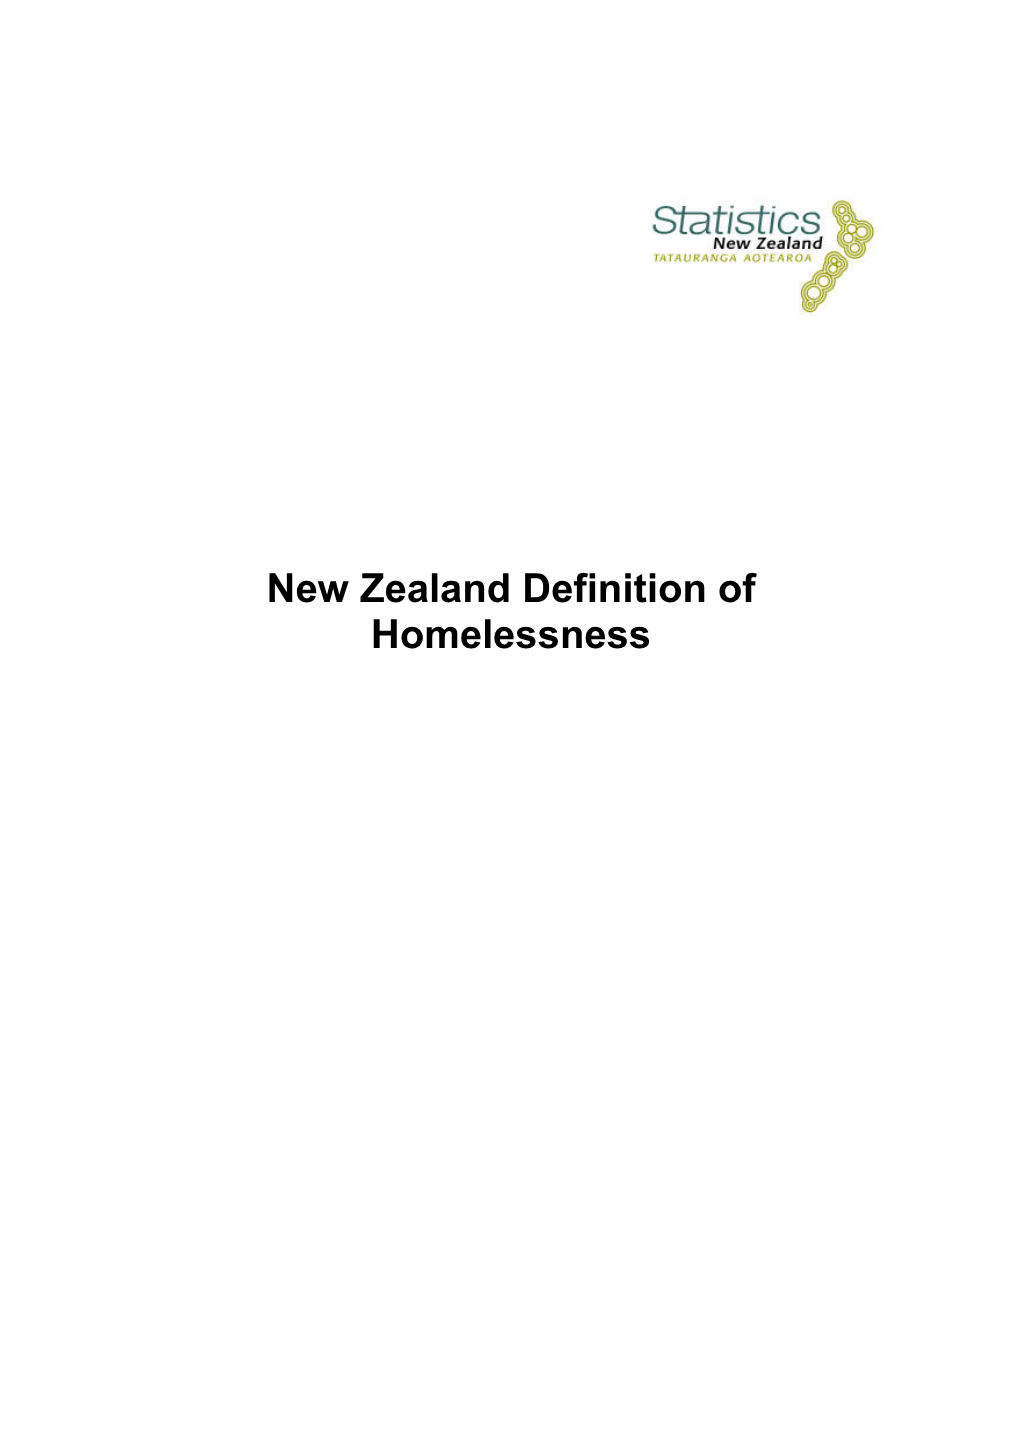 New Zealand Definition of Homelessness